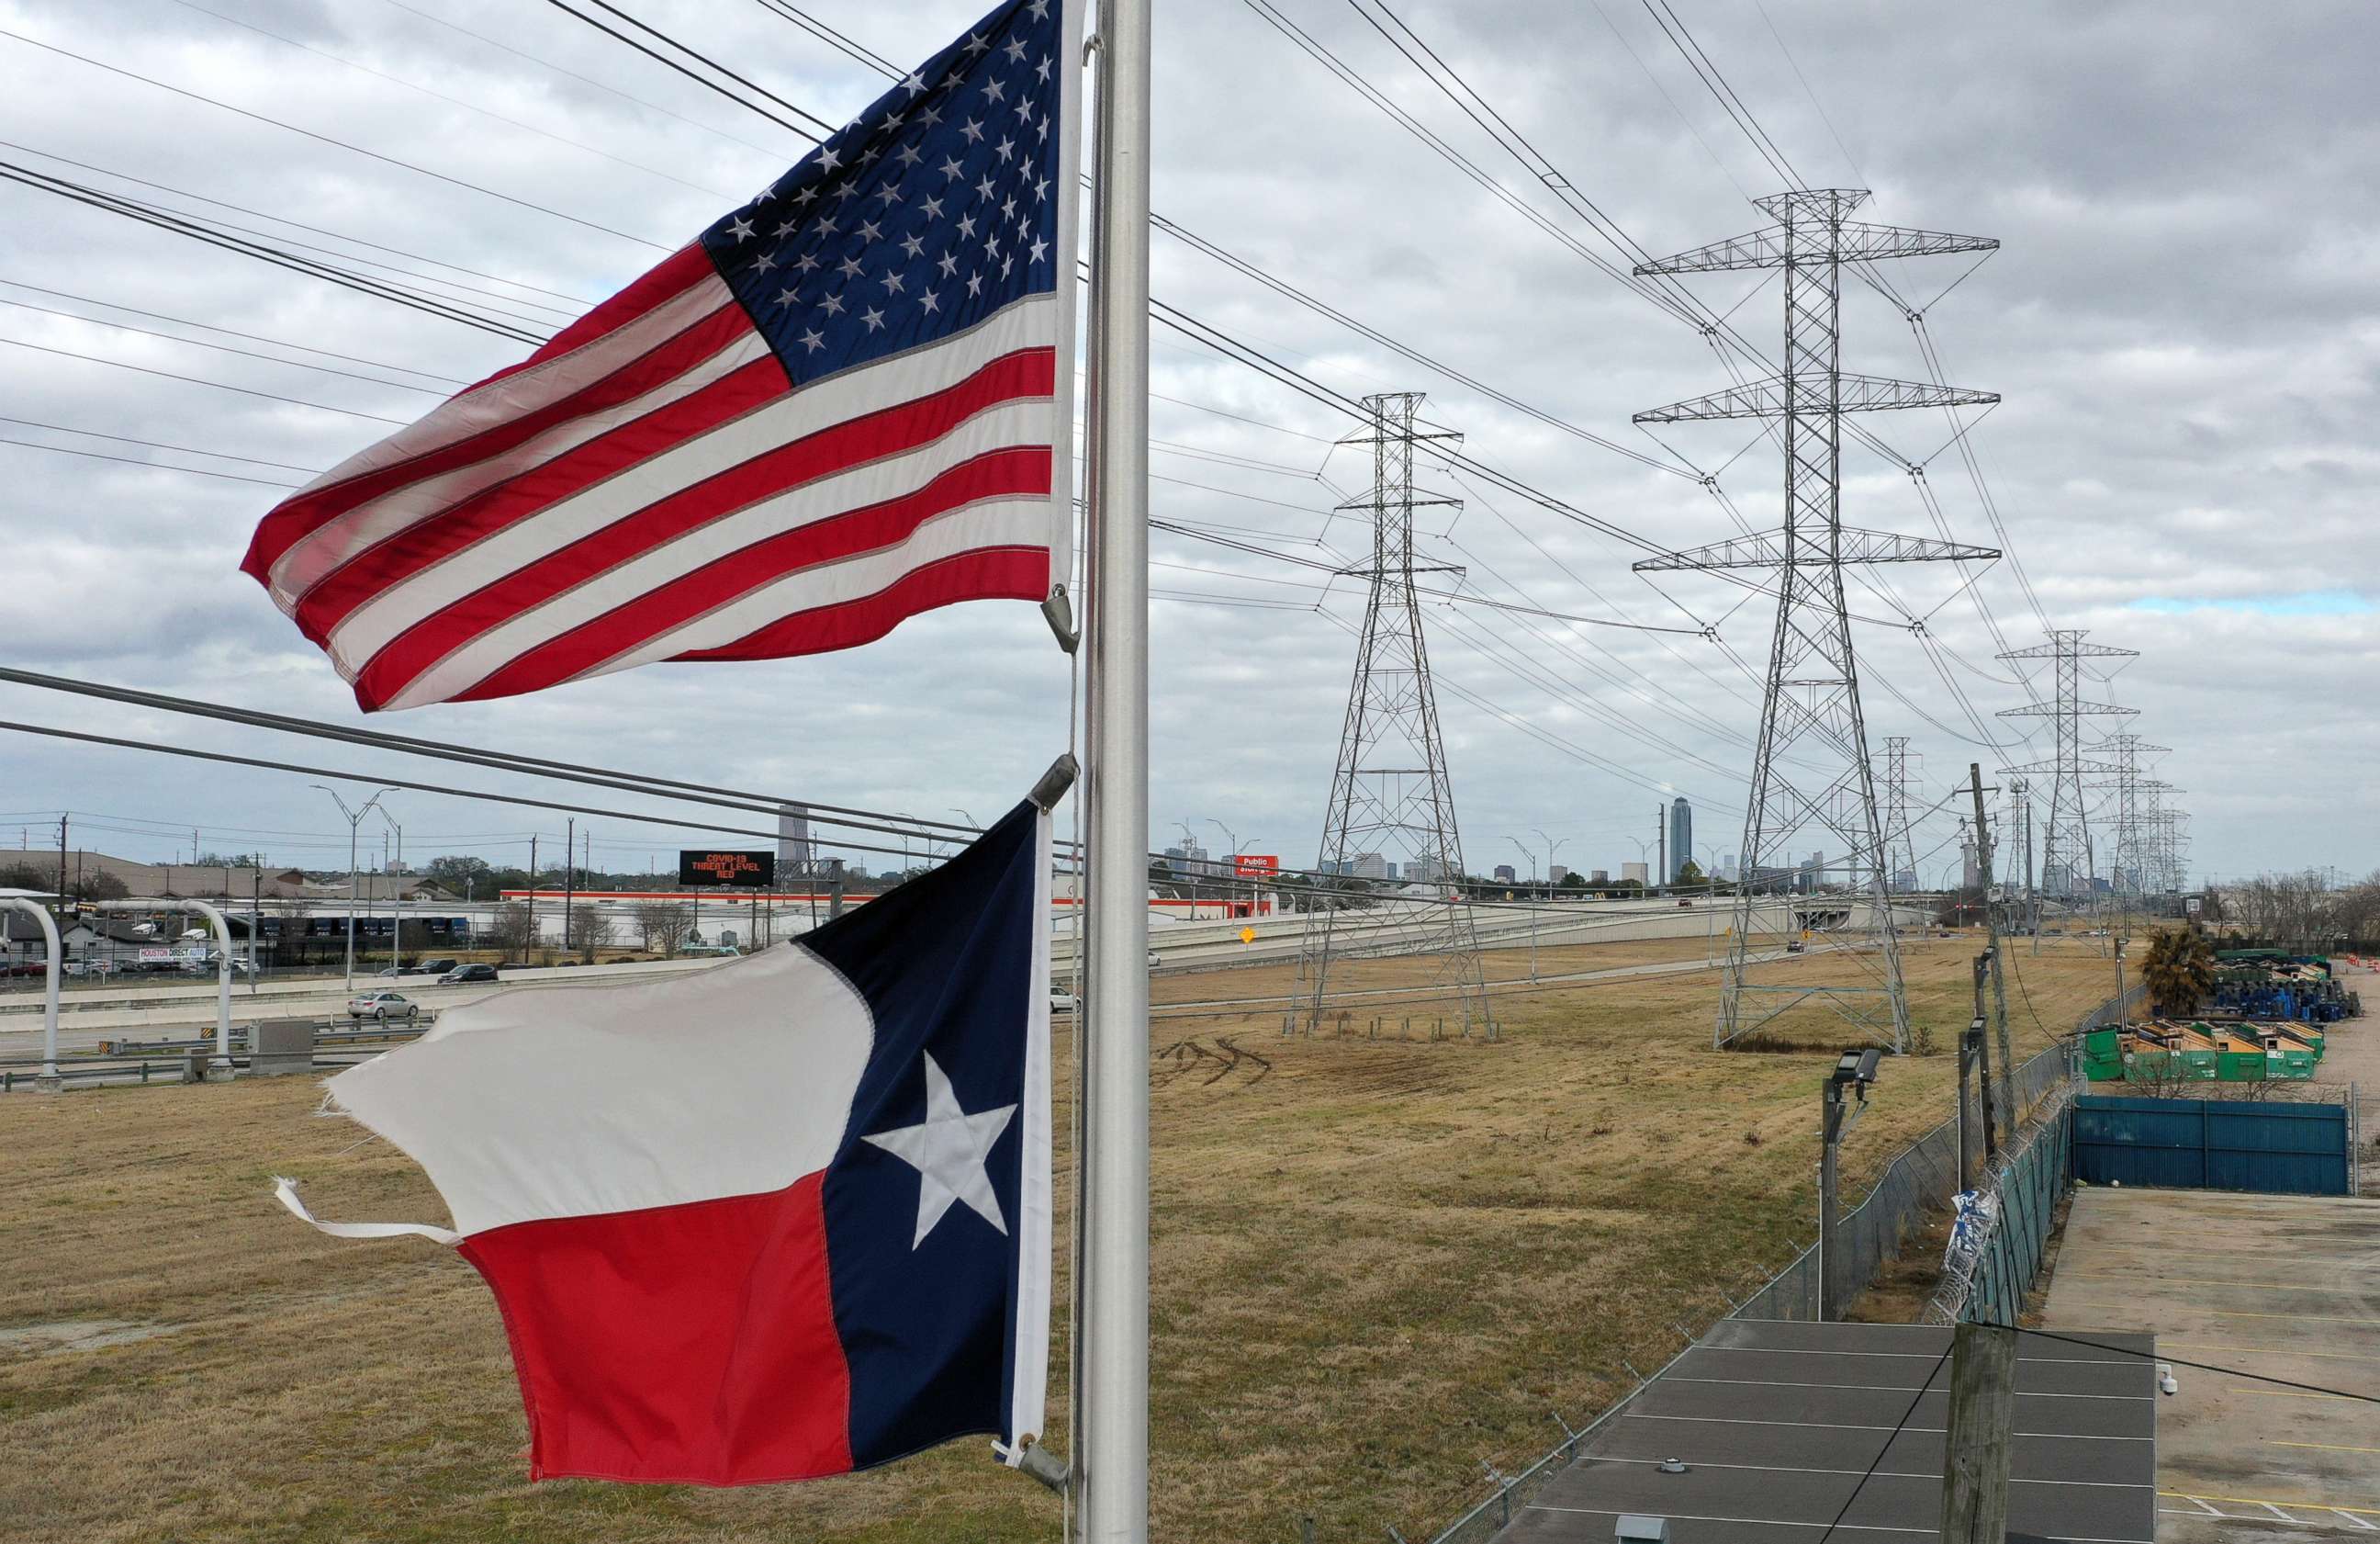 PHOTO: The U.S. and Texas flags fly in front of high voltage transmission towers on Feb. 21, 2021 in Houston, Texas. 